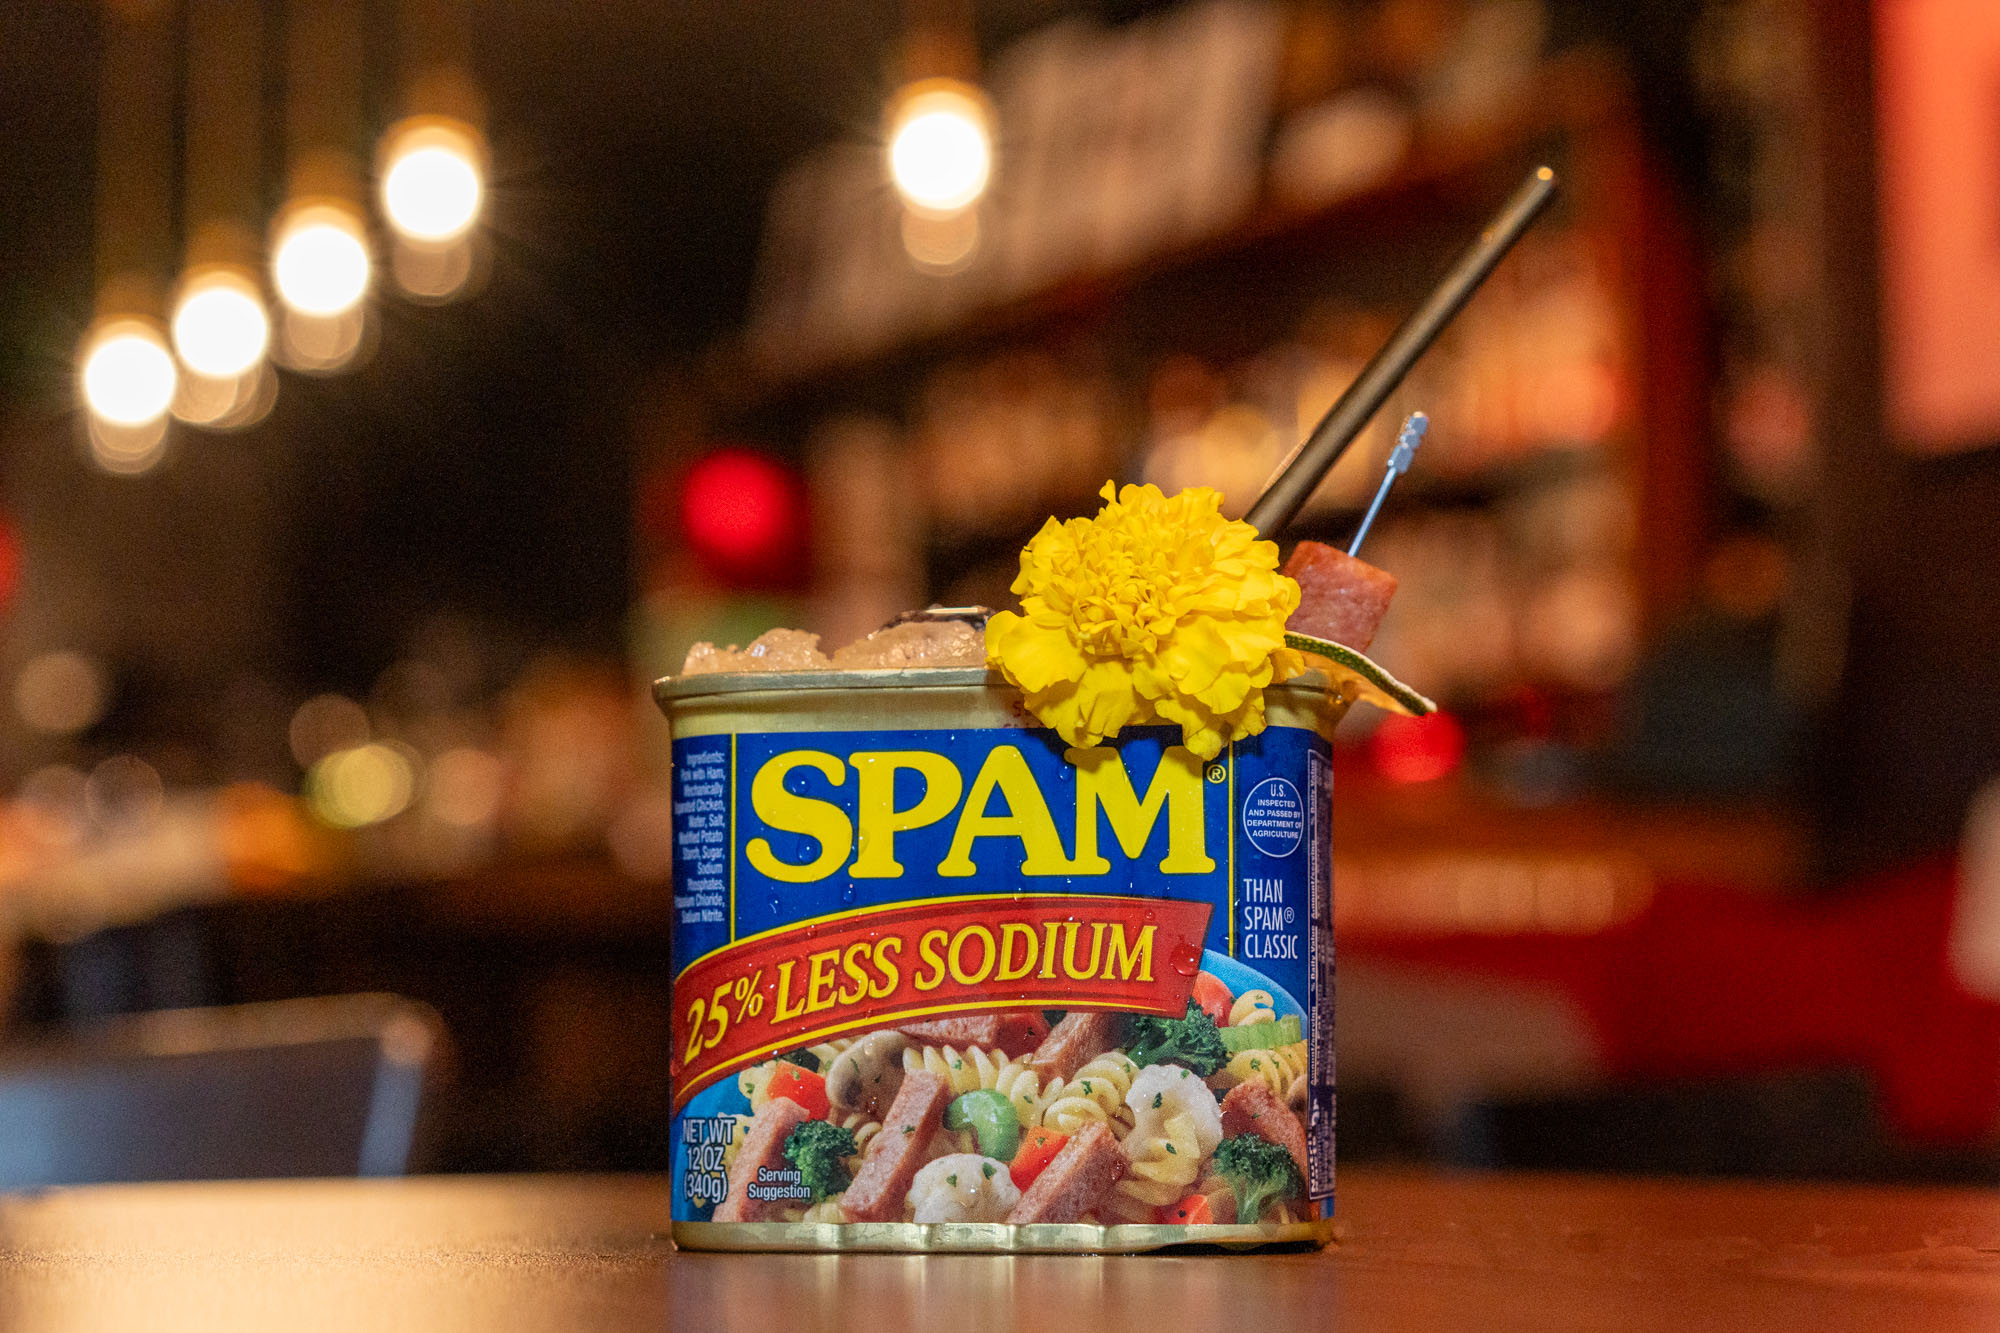 A cocktail served in a Spam container